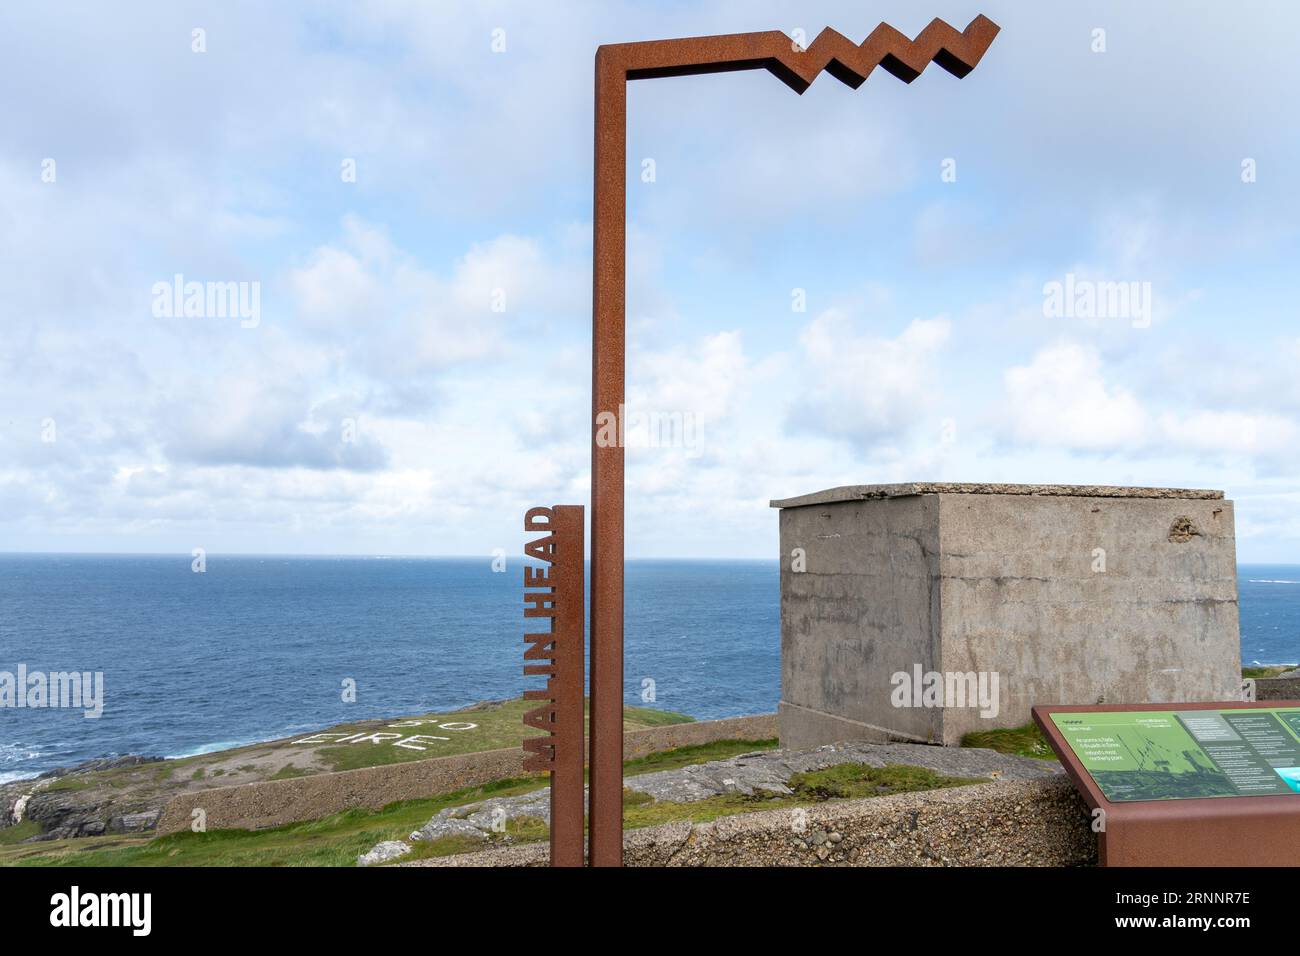 View at Banba's Crown, Malin Head, Inishowen, County Donegal, Irelan. The most northerly point in Ireland. Stock Photo